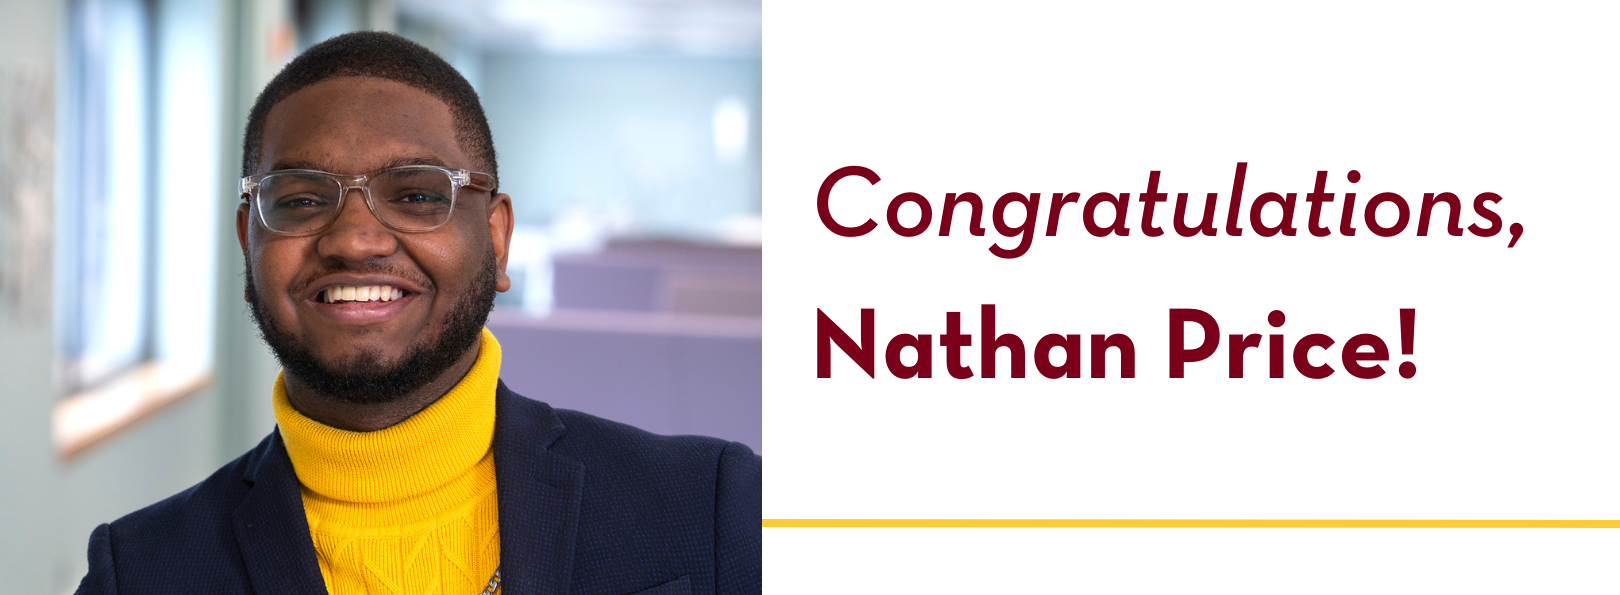 Nathan Price smiles in a headshot wearing glasses, a yellow turtleneck, and a navy blue blazer with the words Congratulations, Nathan Price!